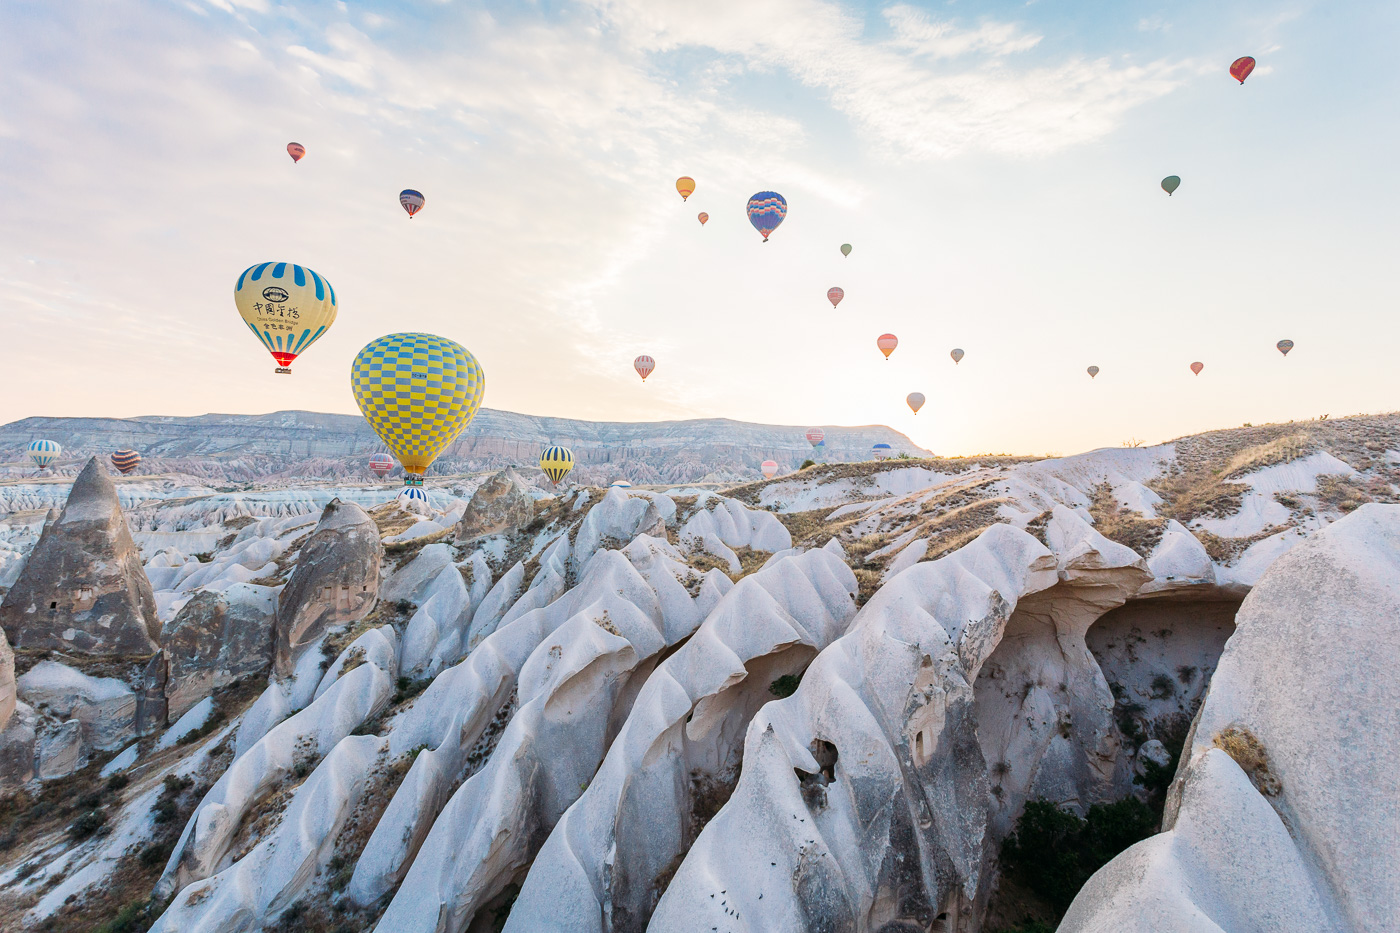 A bird's eye view of fairy chimneys and tuff rock formations from our Cappadocia Hot Air Balloon Ride